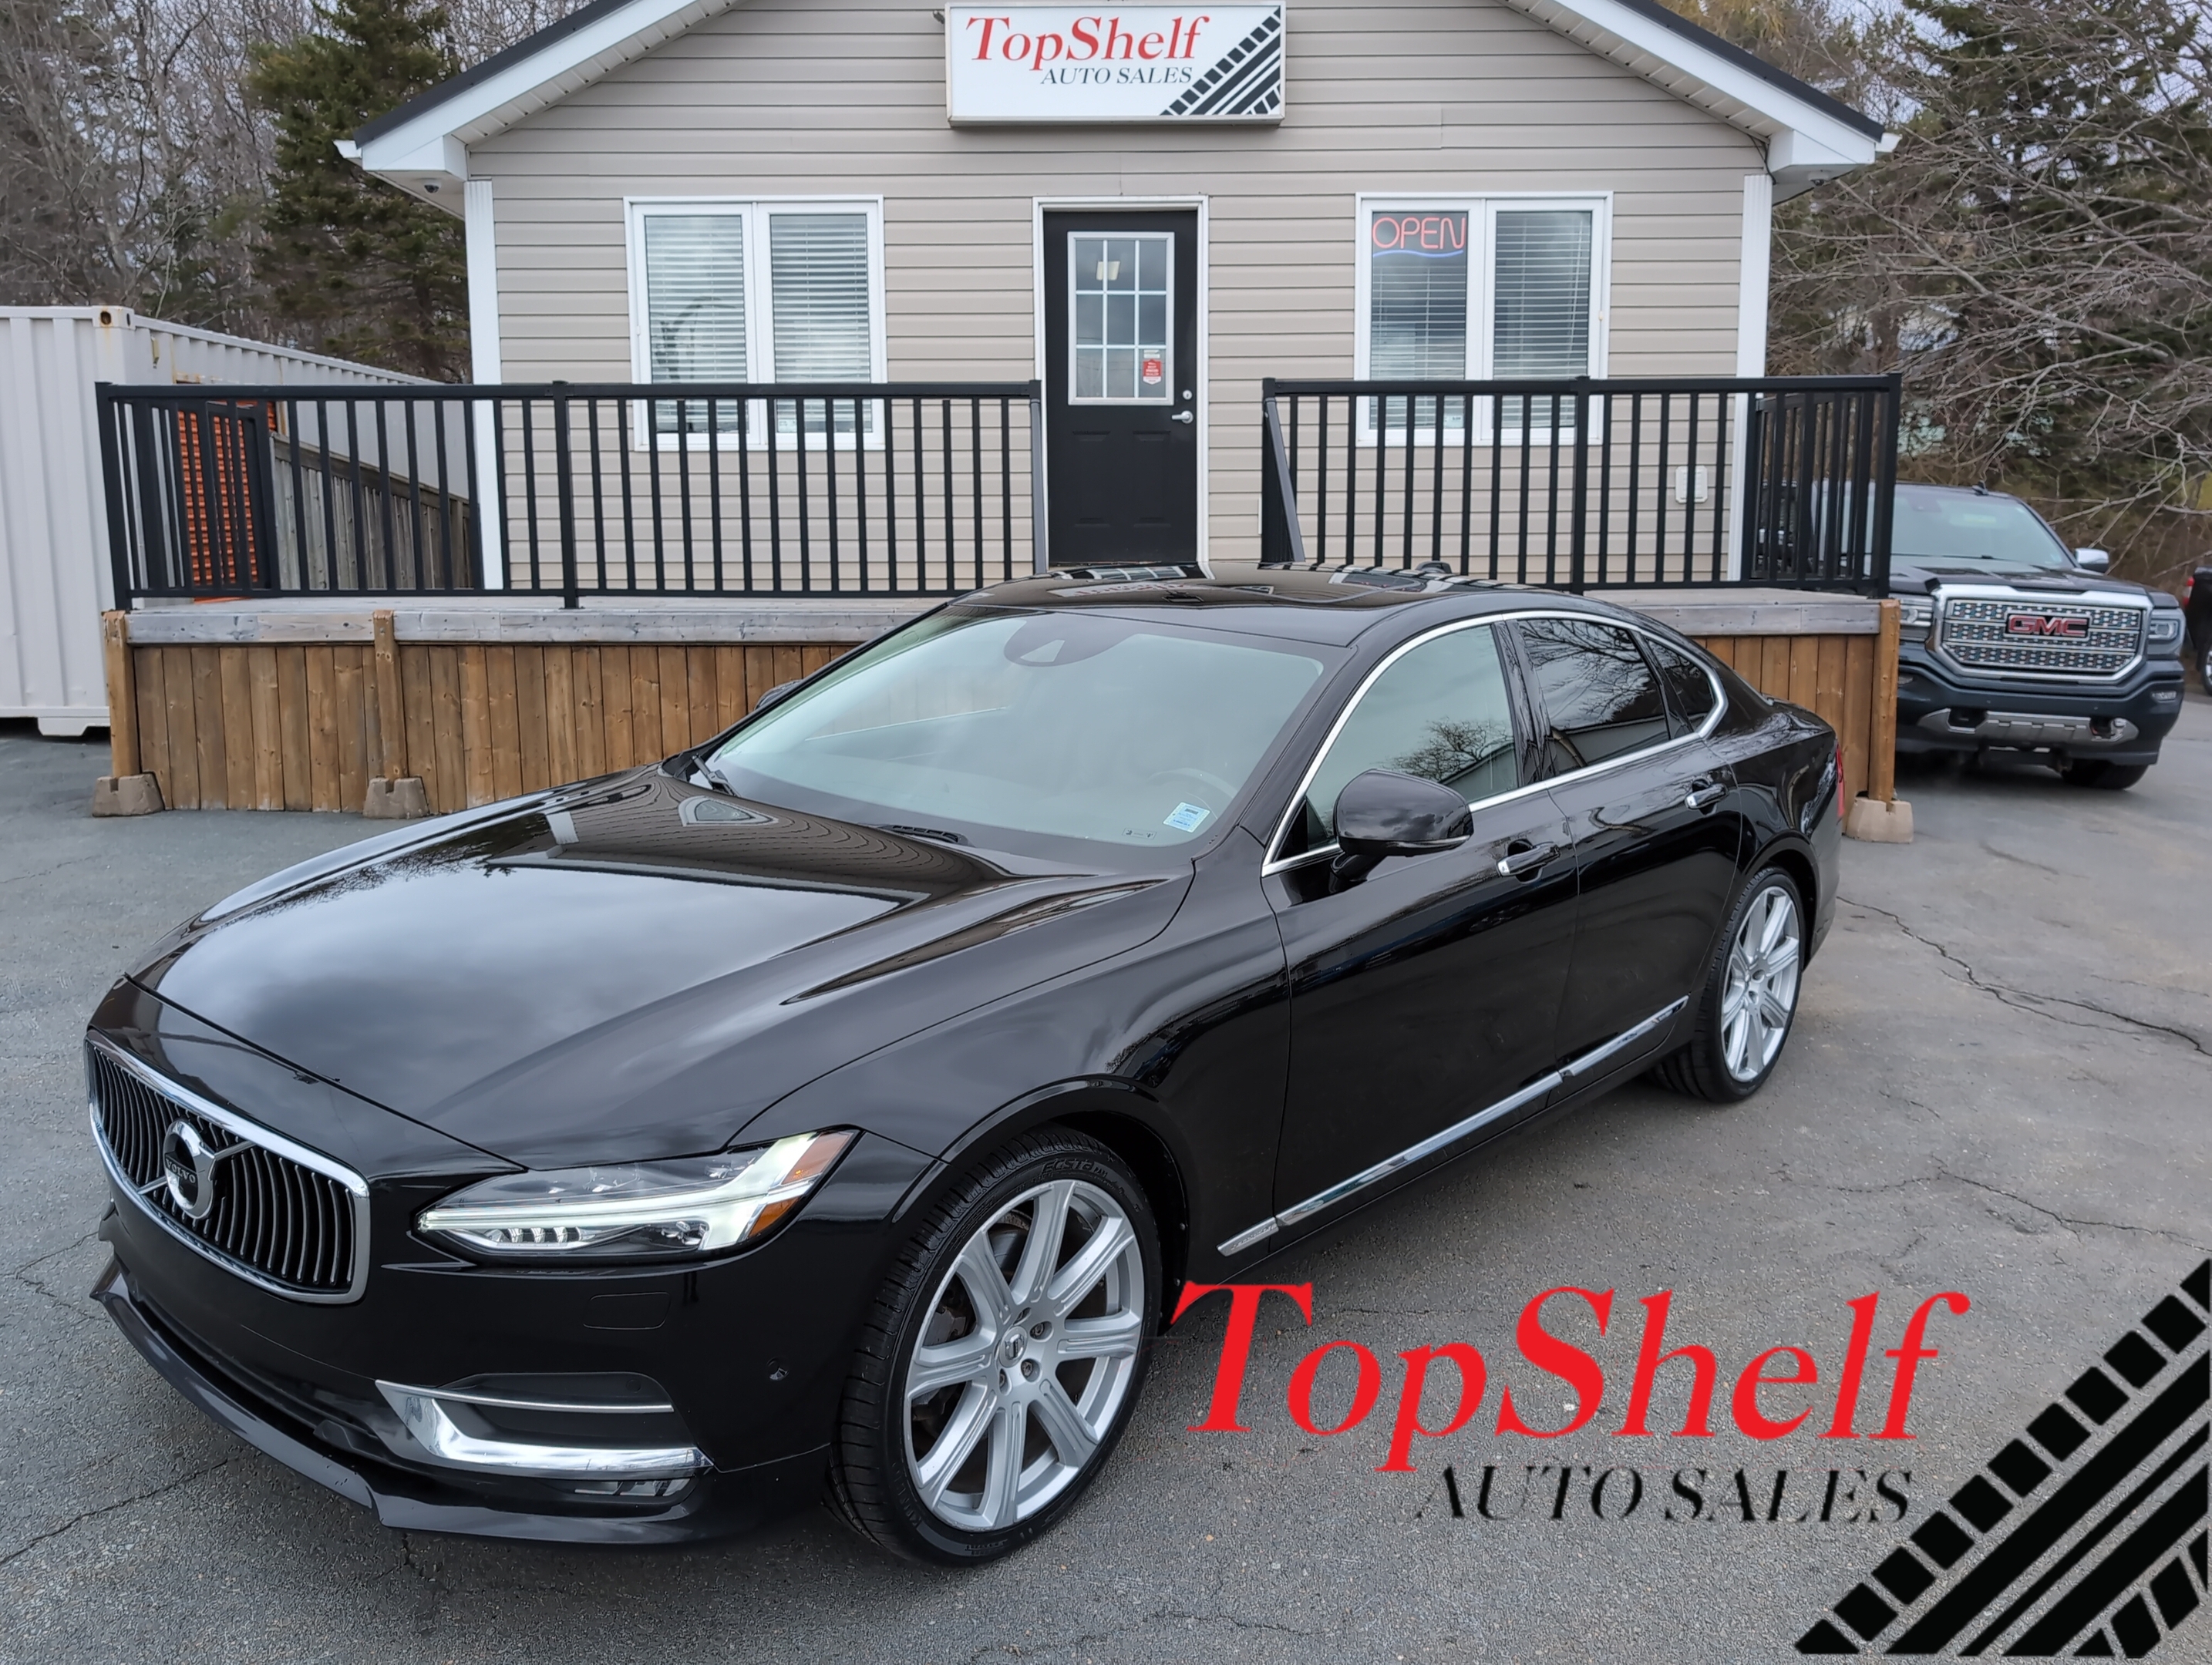 2017 Volvo S90 T6 Inscription AWD | New Tires | Bowers & Wilkins